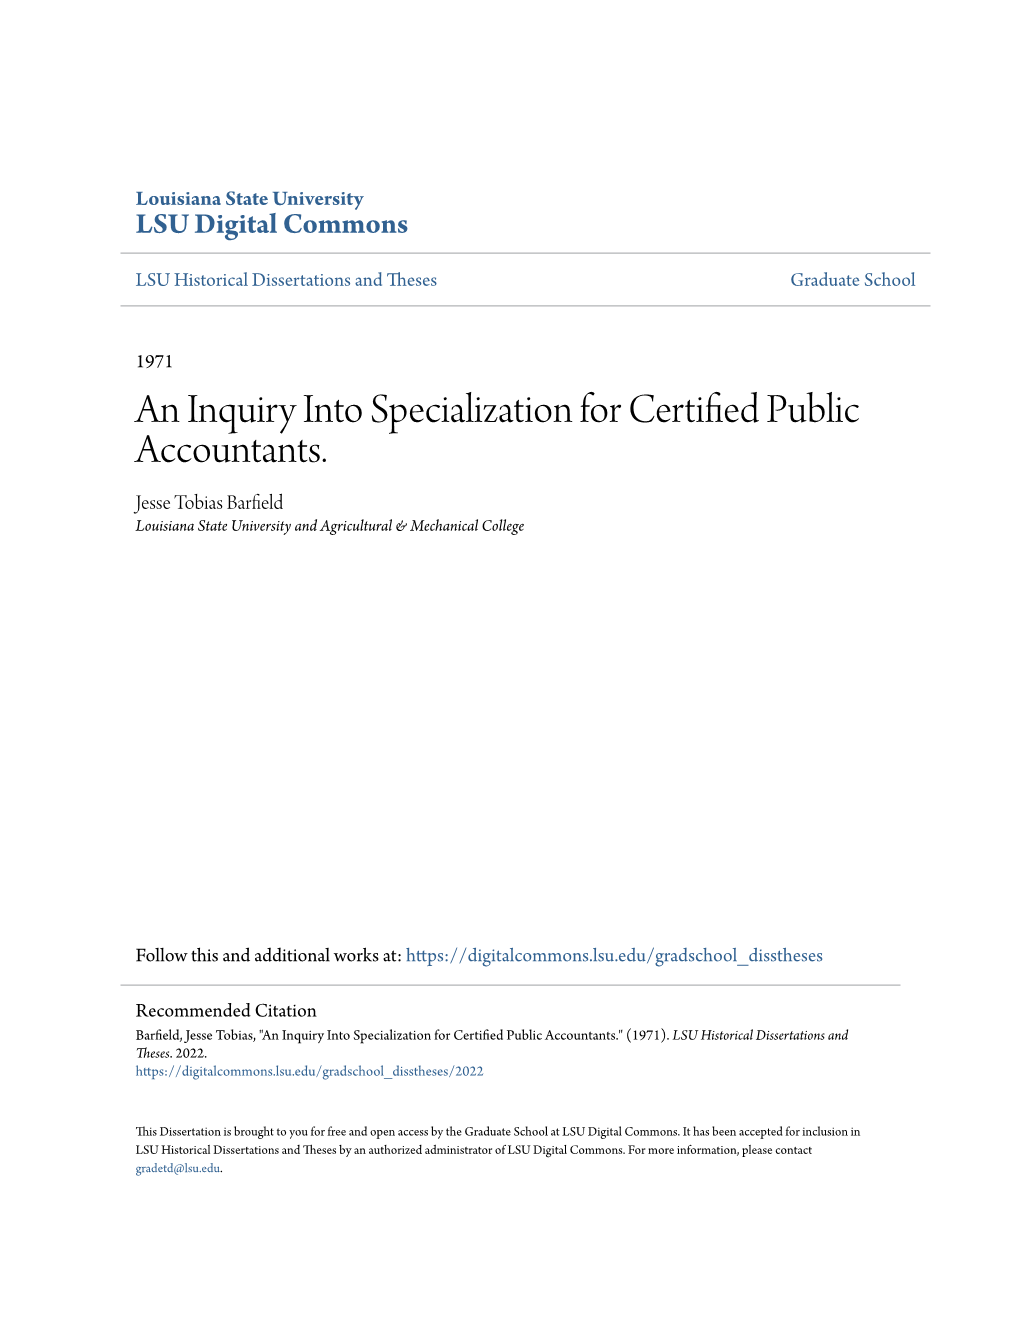 An Inquiry Into Specialization for Certified Public Accountants. Jesse Tobias Barfield Louisiana State University and Agricultural & Mechanical College